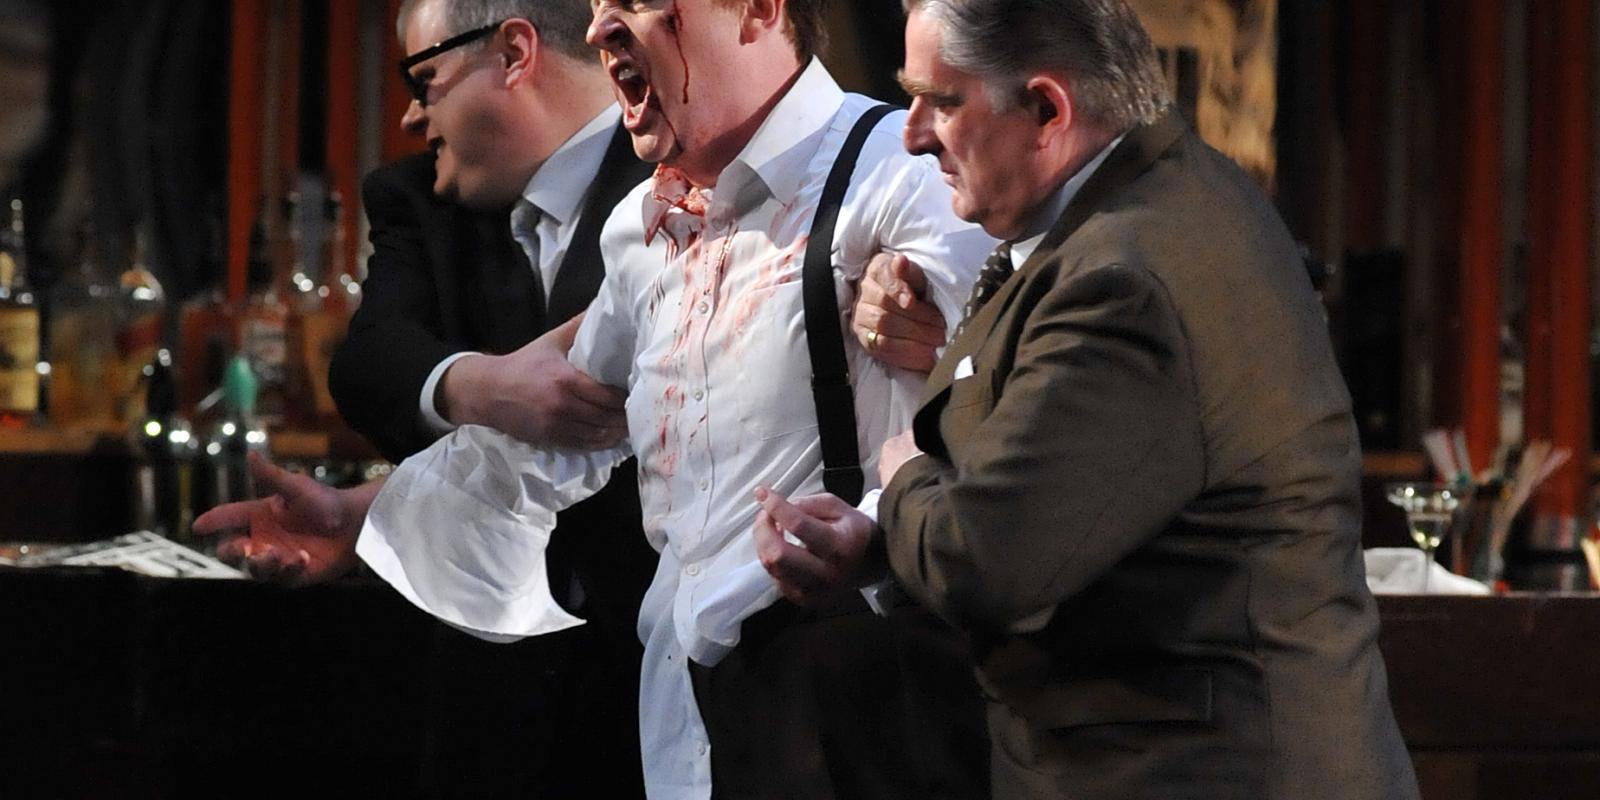 scene from ENO's Rigoletto of man covered in blood being held up by two other men